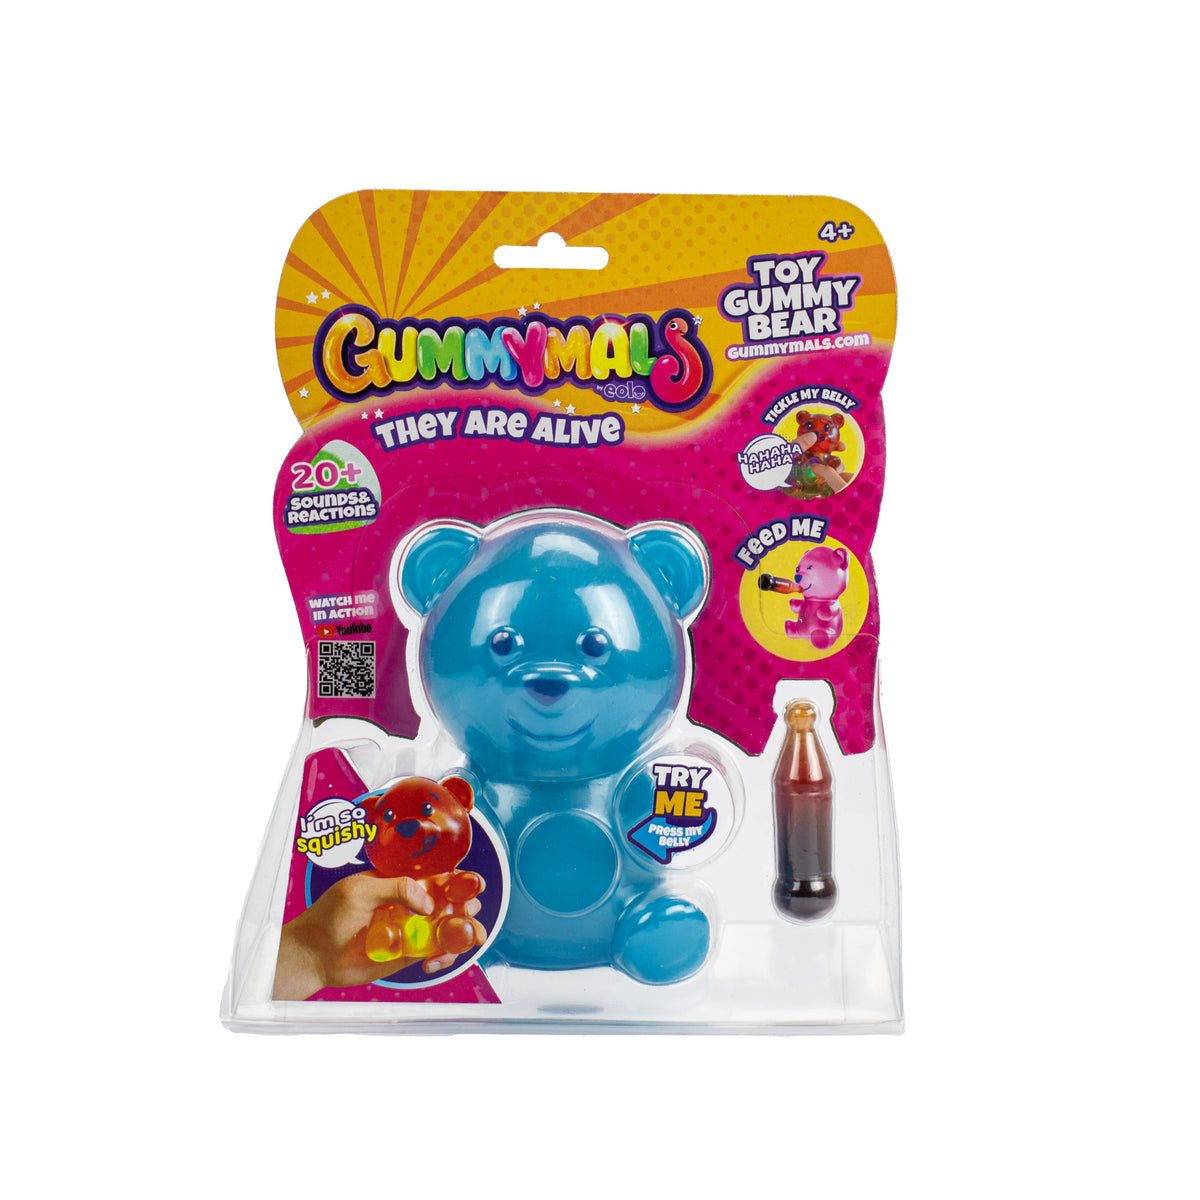 Gummymals Interactive Gummy Bear With 20 Reactions & Sounds - Blue